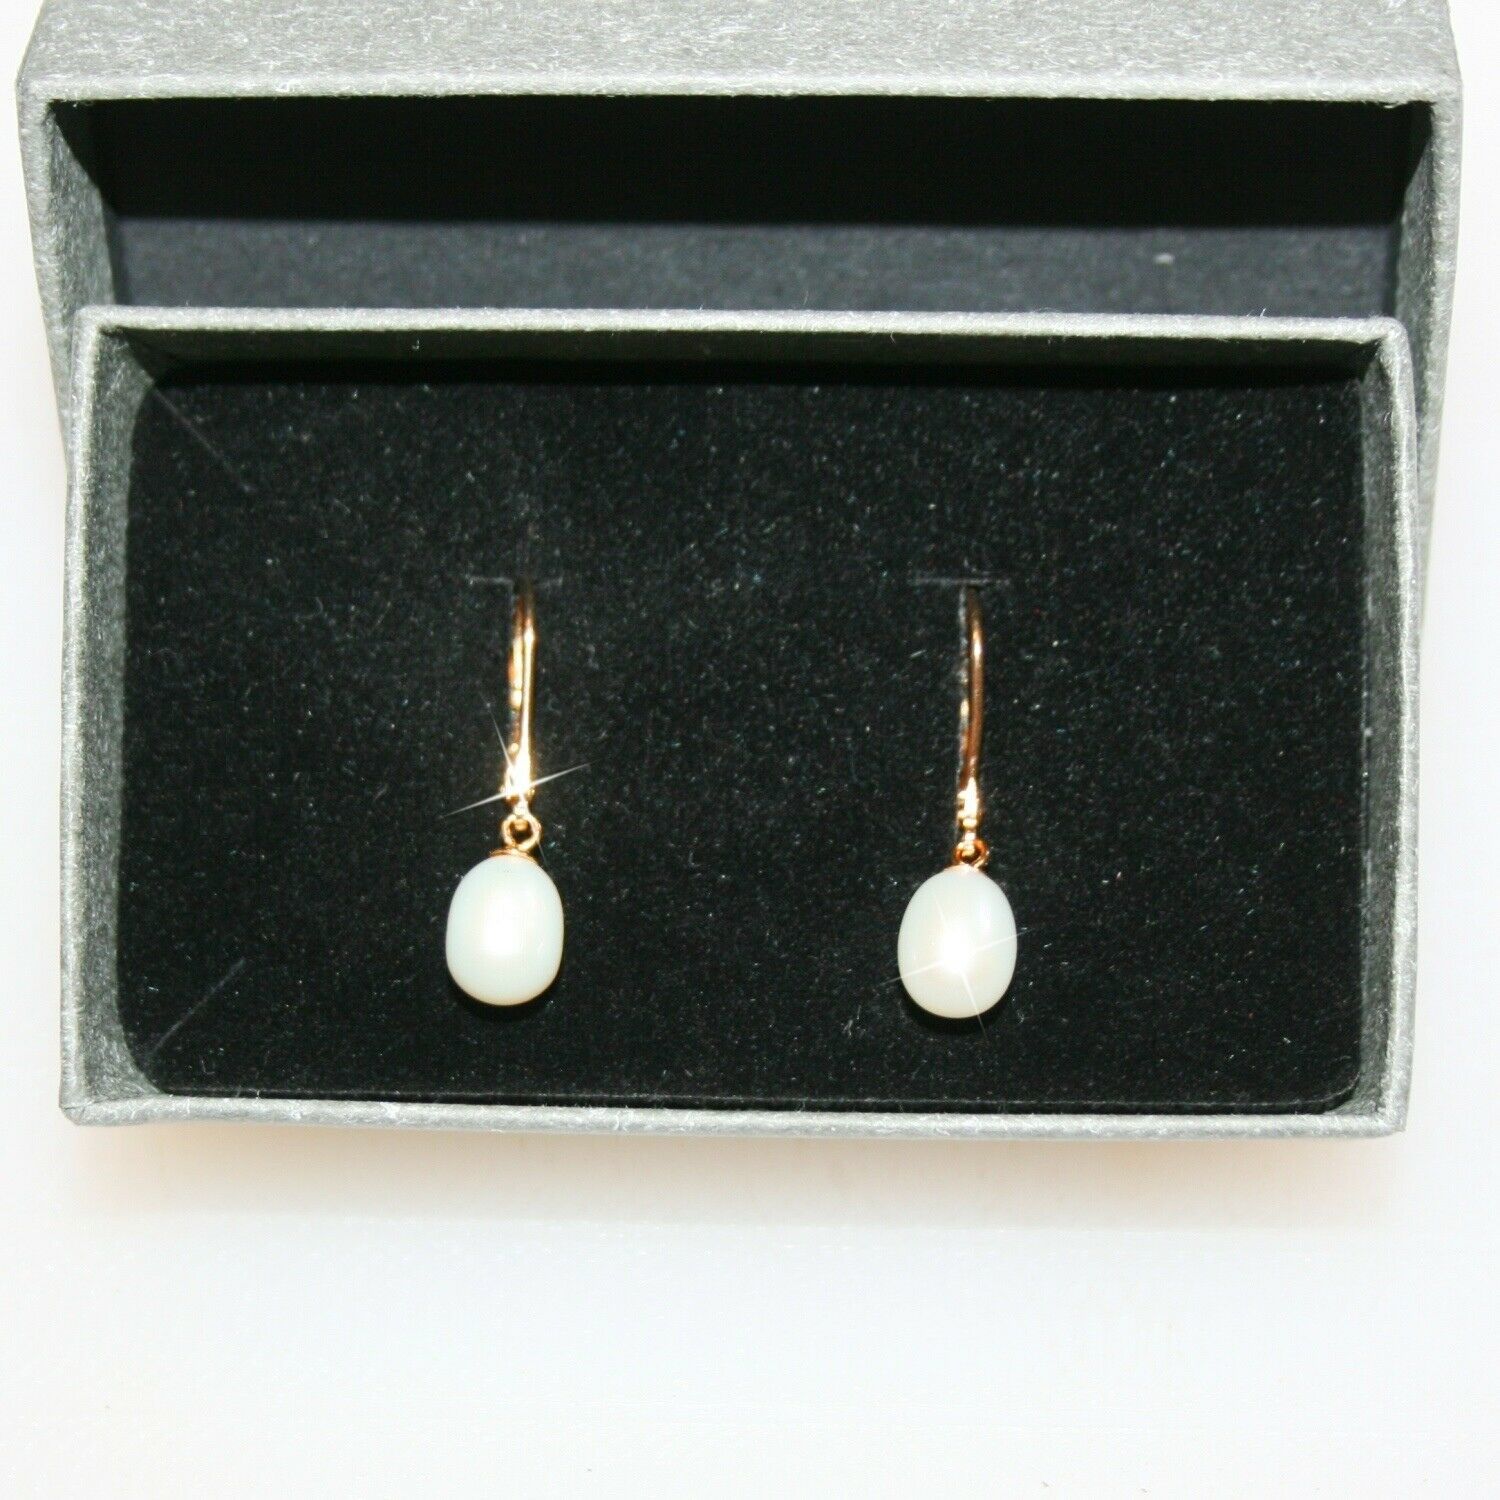 Primary image for AAA White Pearl Leverback Dangle Earrings Gift Box 14k Yellow Gold over 925 SS